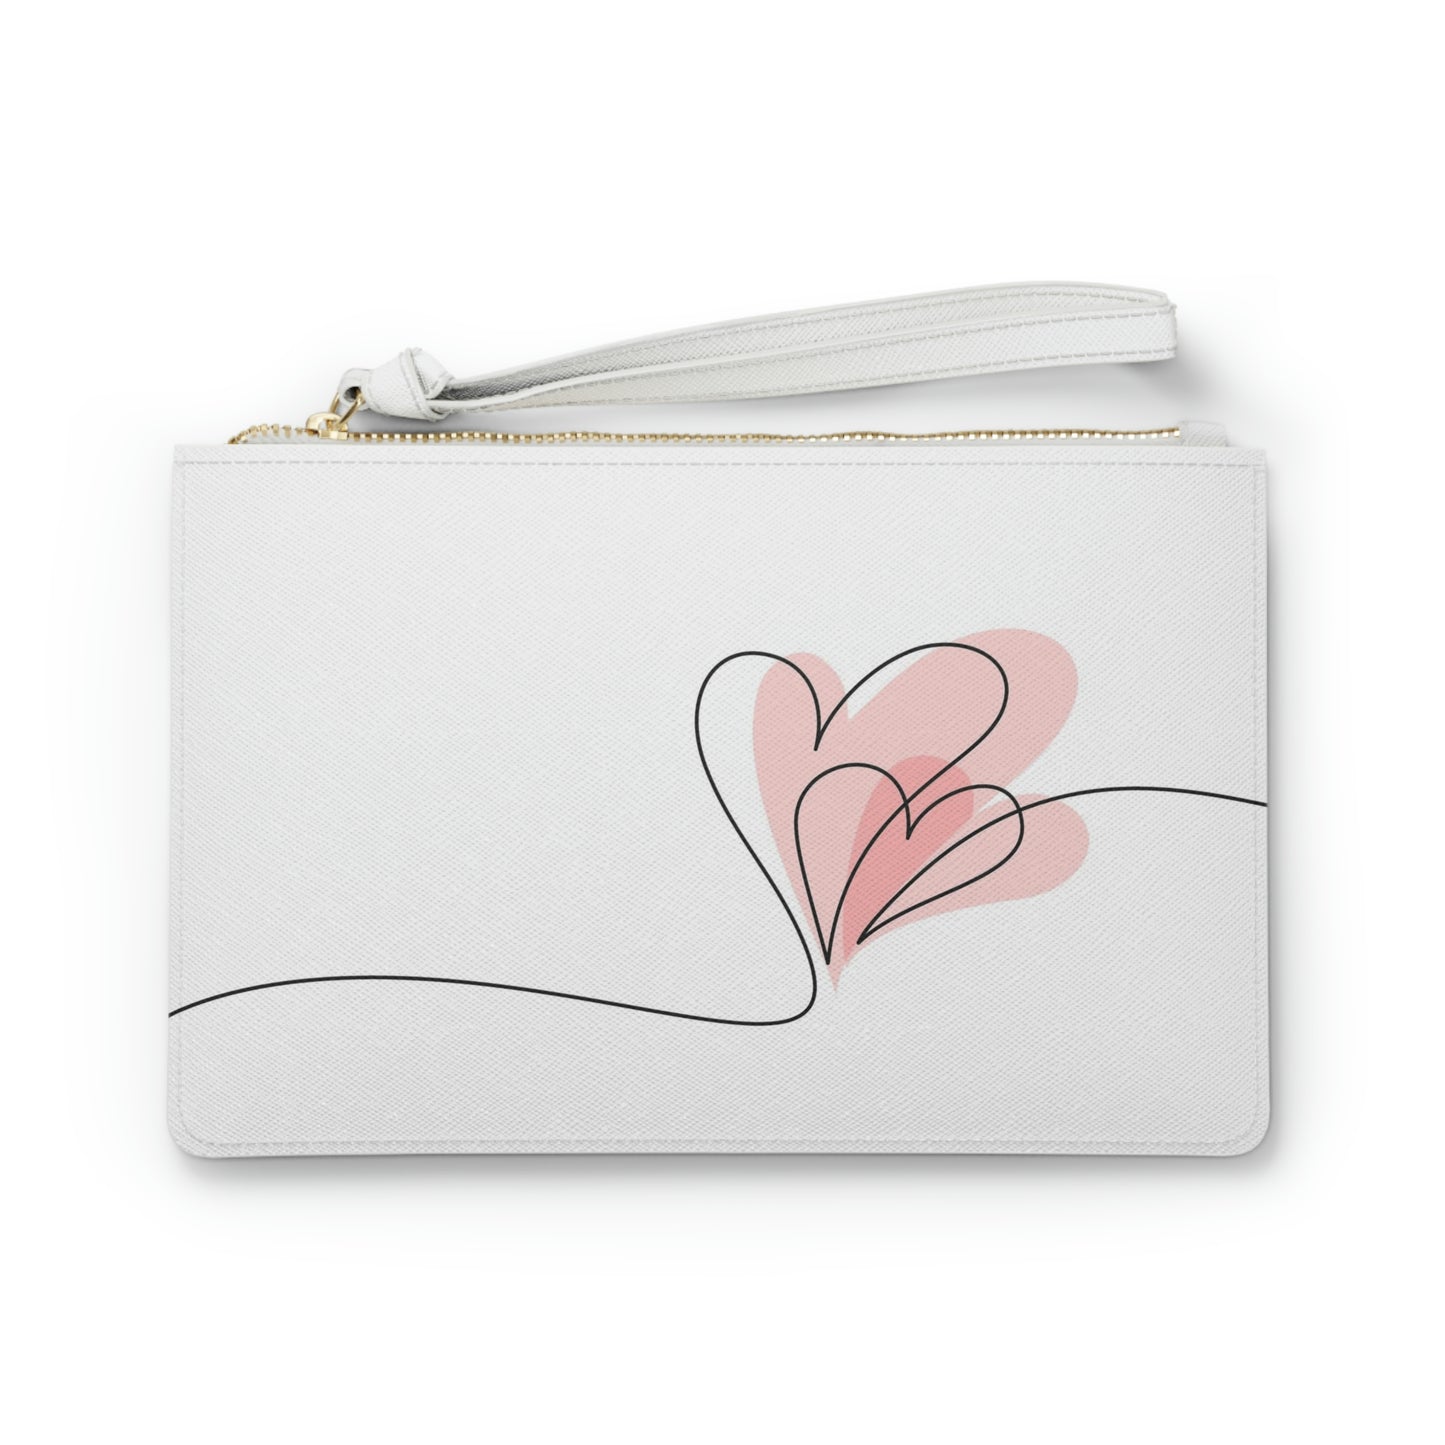 Heart Clutch Bag | BKLA | shoes & accessories | backpack, hat, phone cover, tote bags, clutch bags